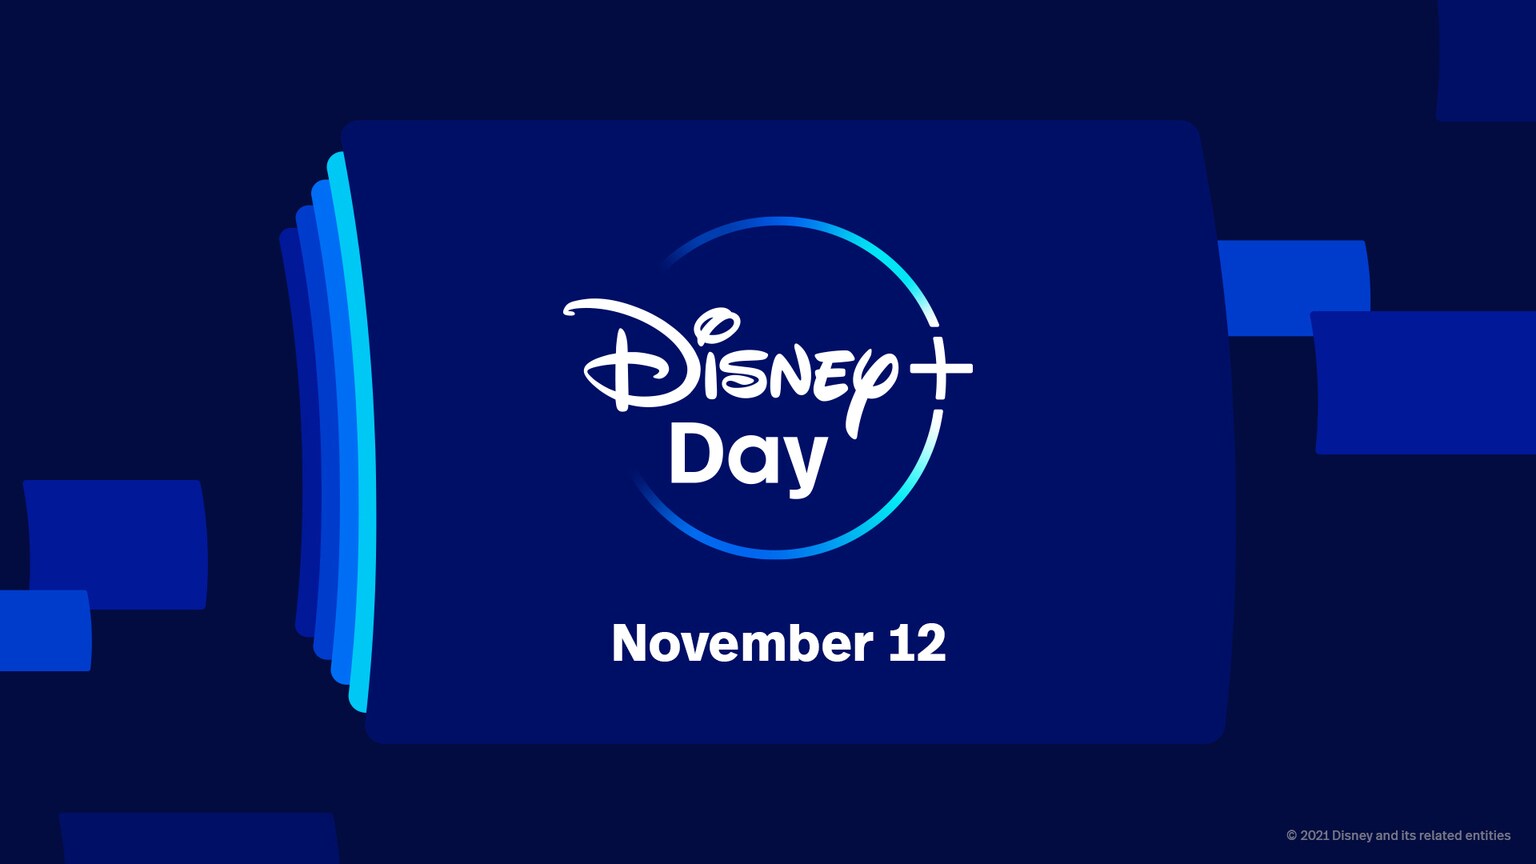 Disney+ Day Kicks Off Global Celebration With Week-Long, Company-Wide Promotions